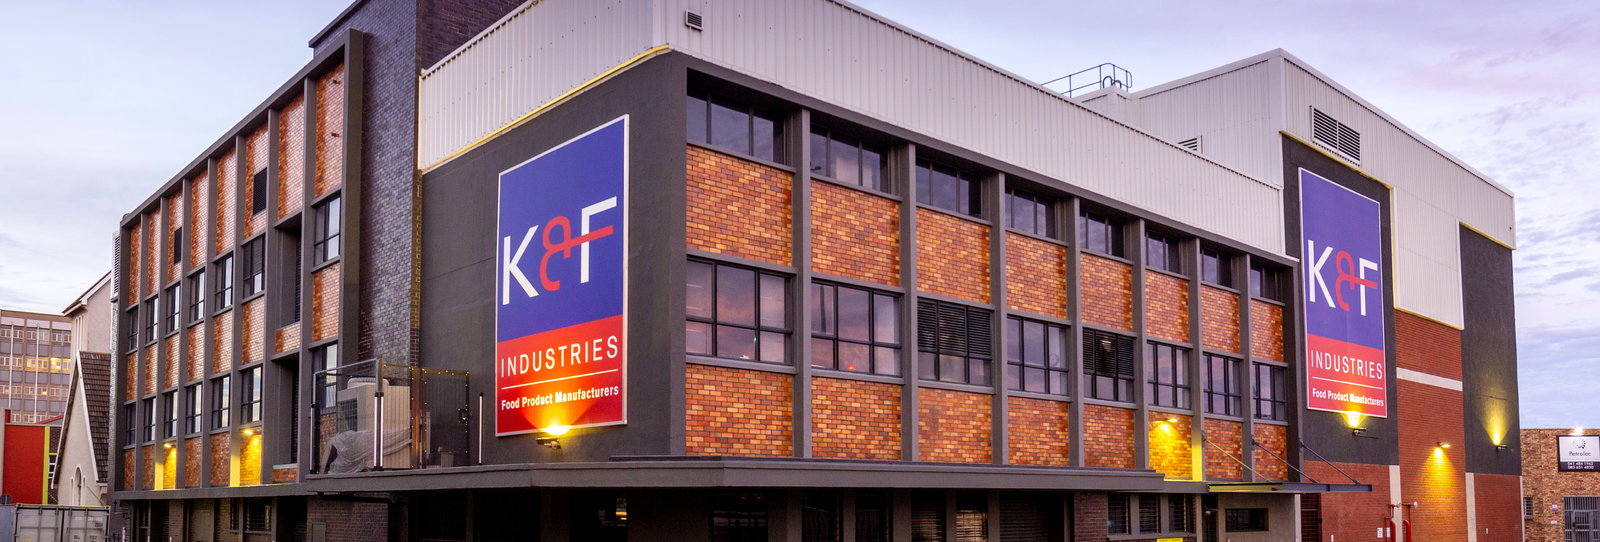 Contact K&F Industries